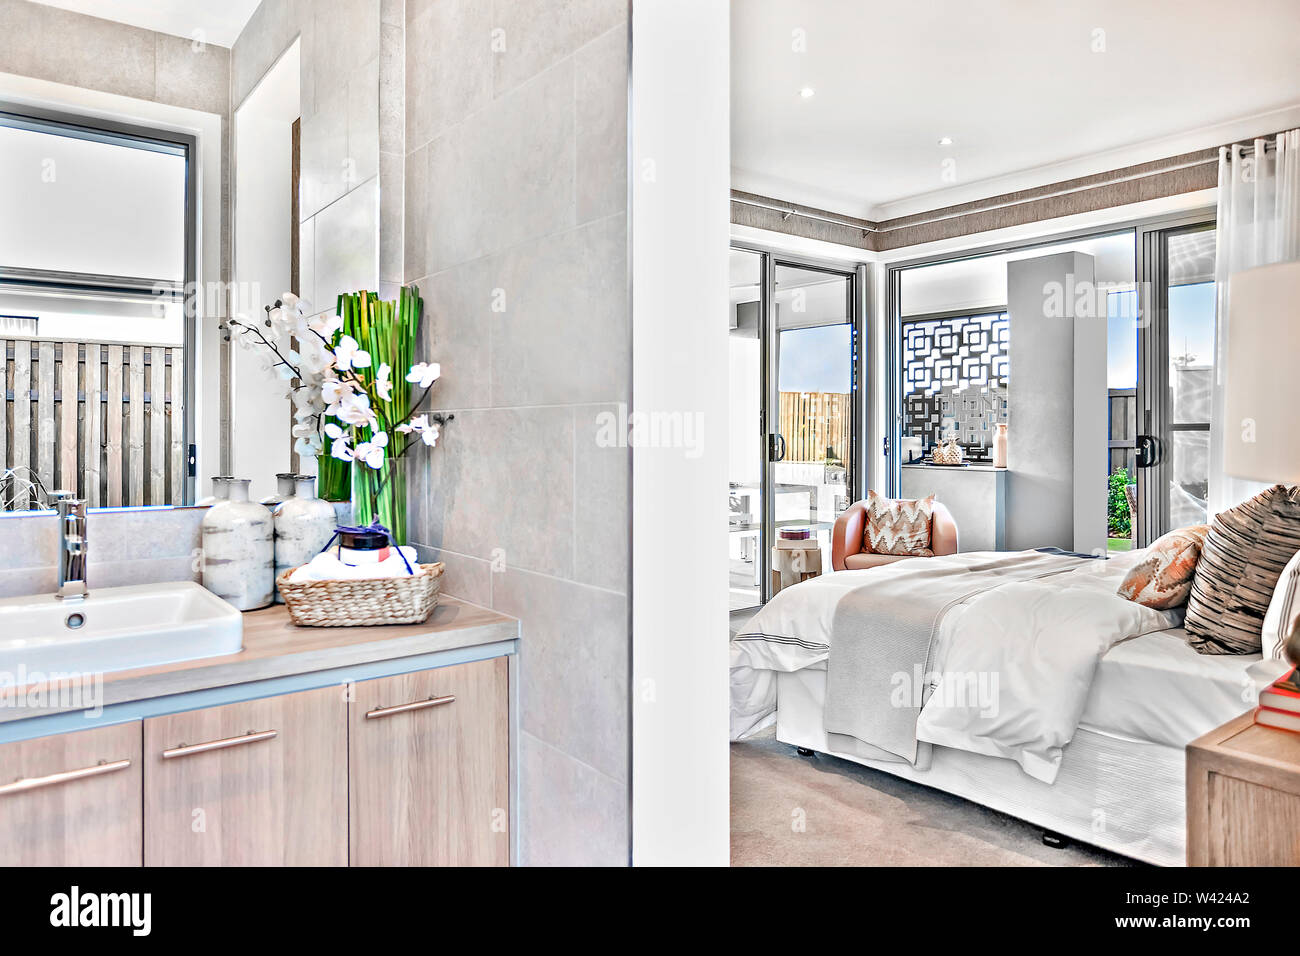 Modern Washroom Attached To The Bedroom In A Luxury House With A Master Bed And Sheets Beside Open Door And Windows To The Outside Stock Photo Alamy